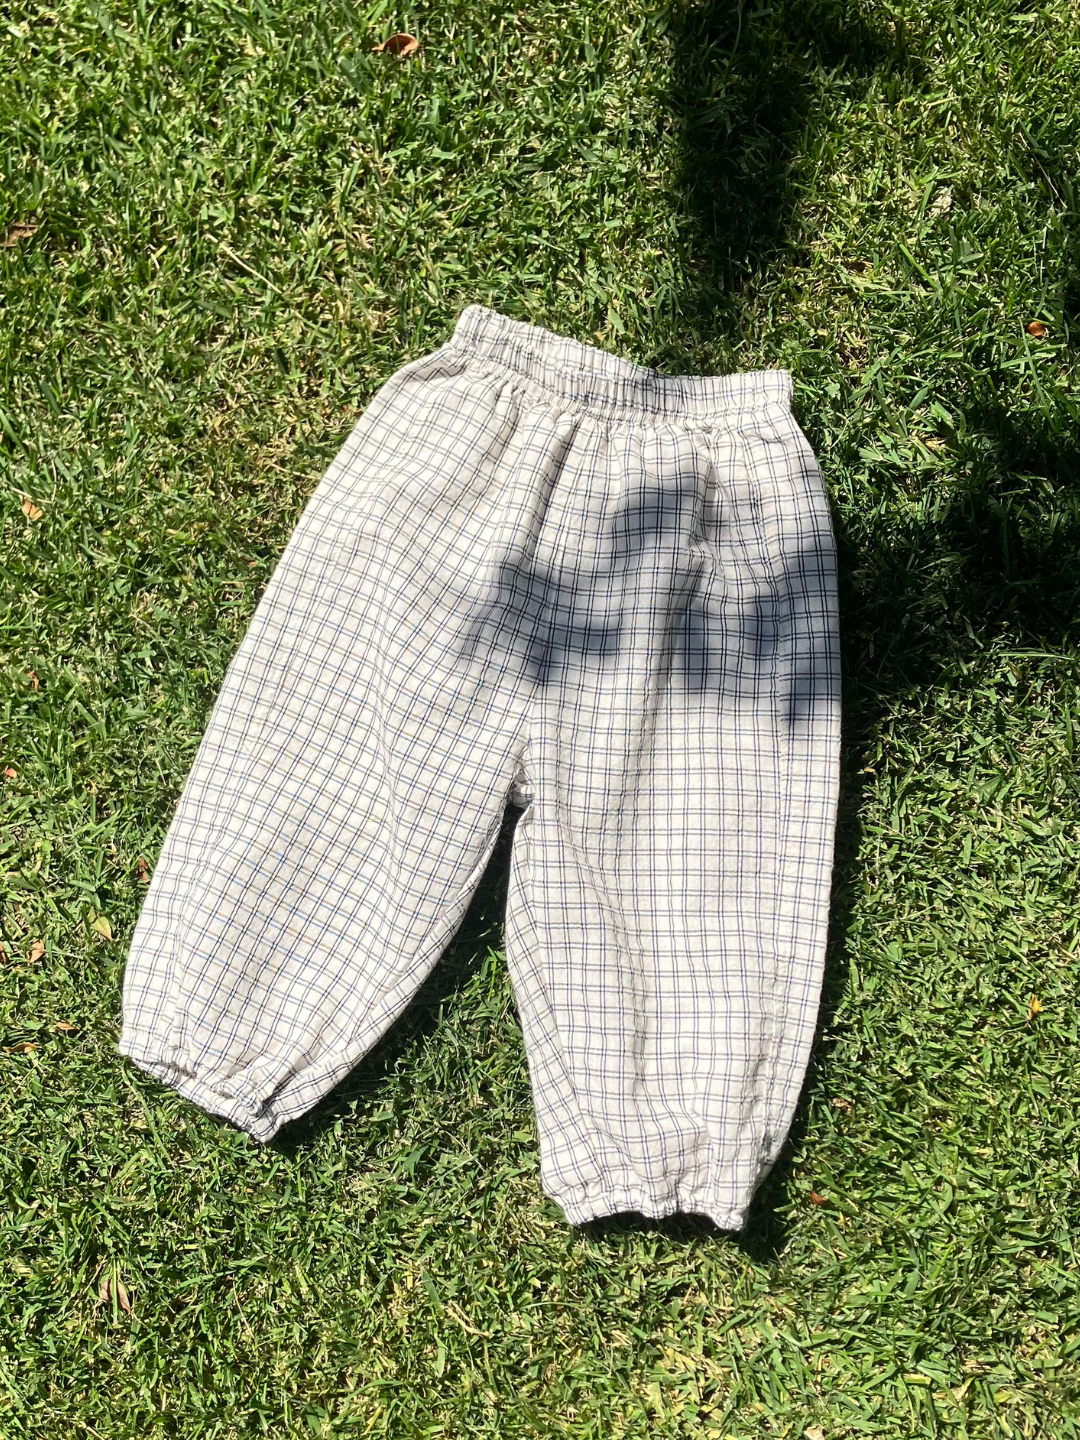 Kids' grid check pull-on pant laid flat on the grass